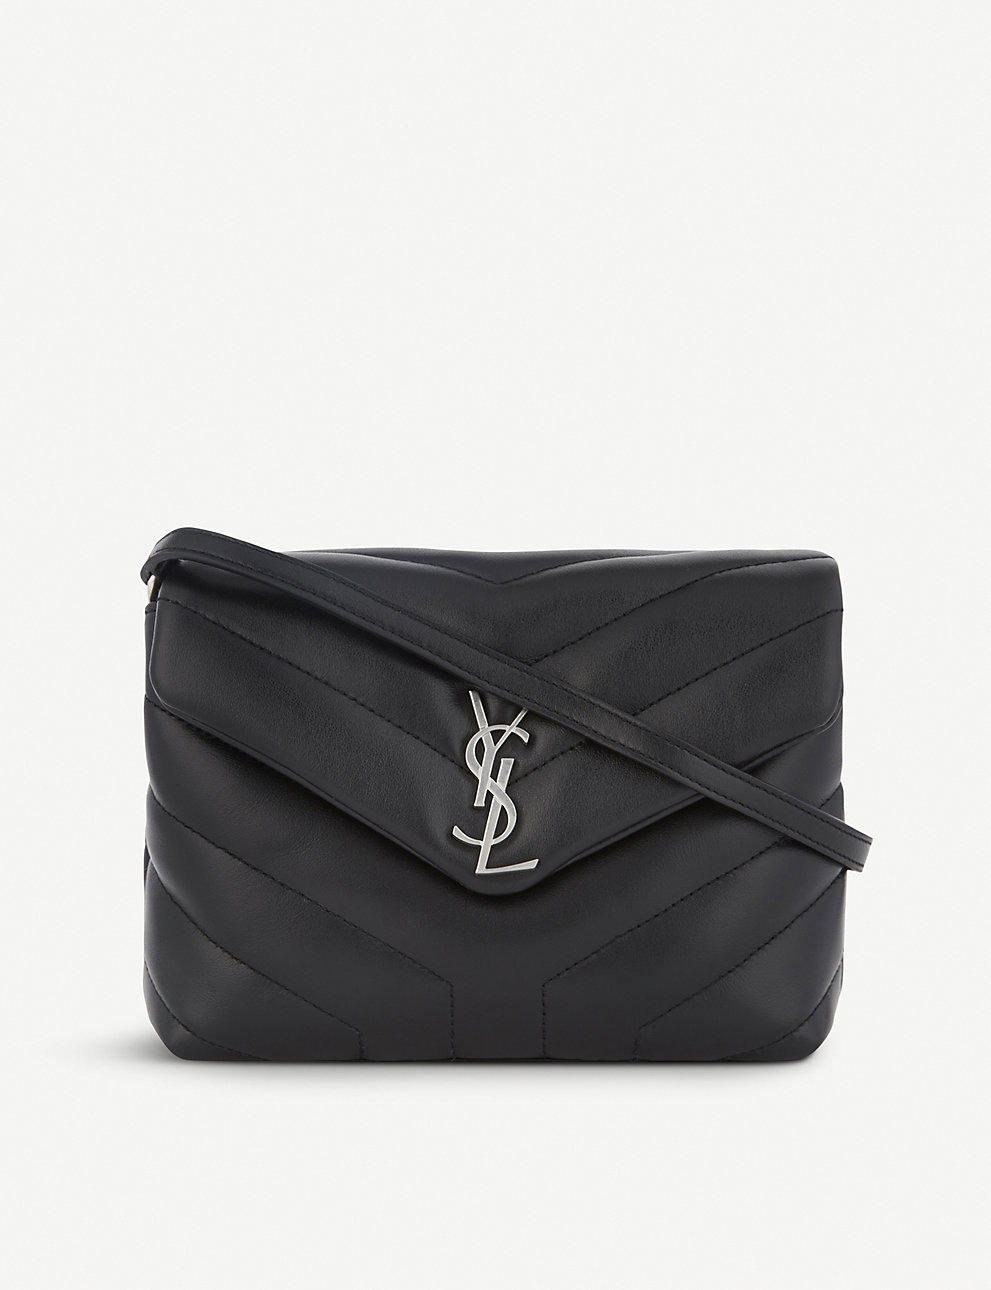 Yves Saint Laurent, Bags, Copy Ysl Small Loulou